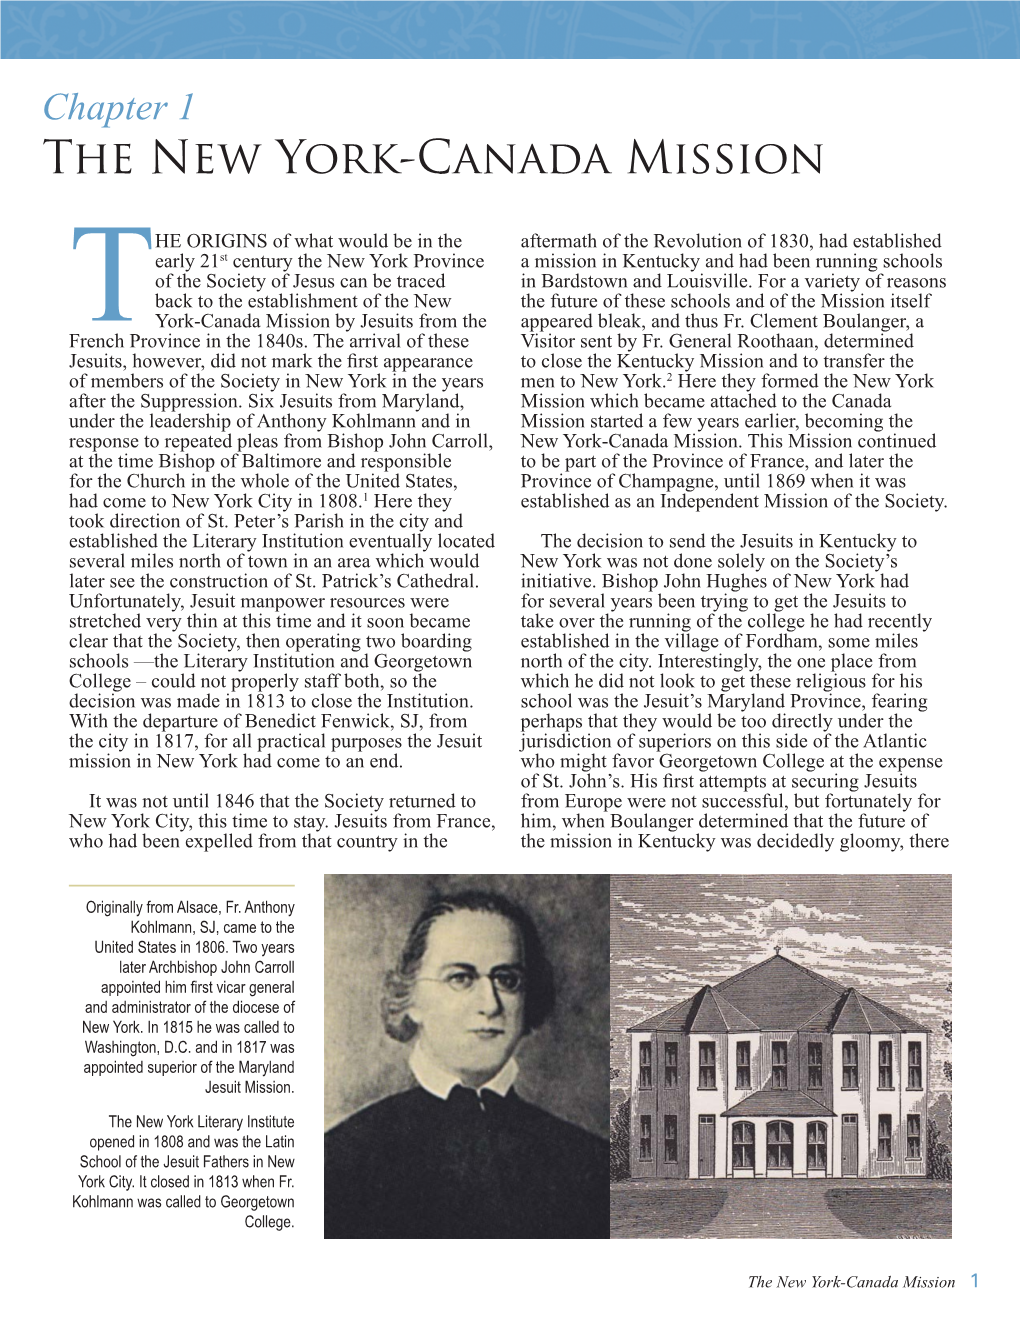 The New York-Canada Mission